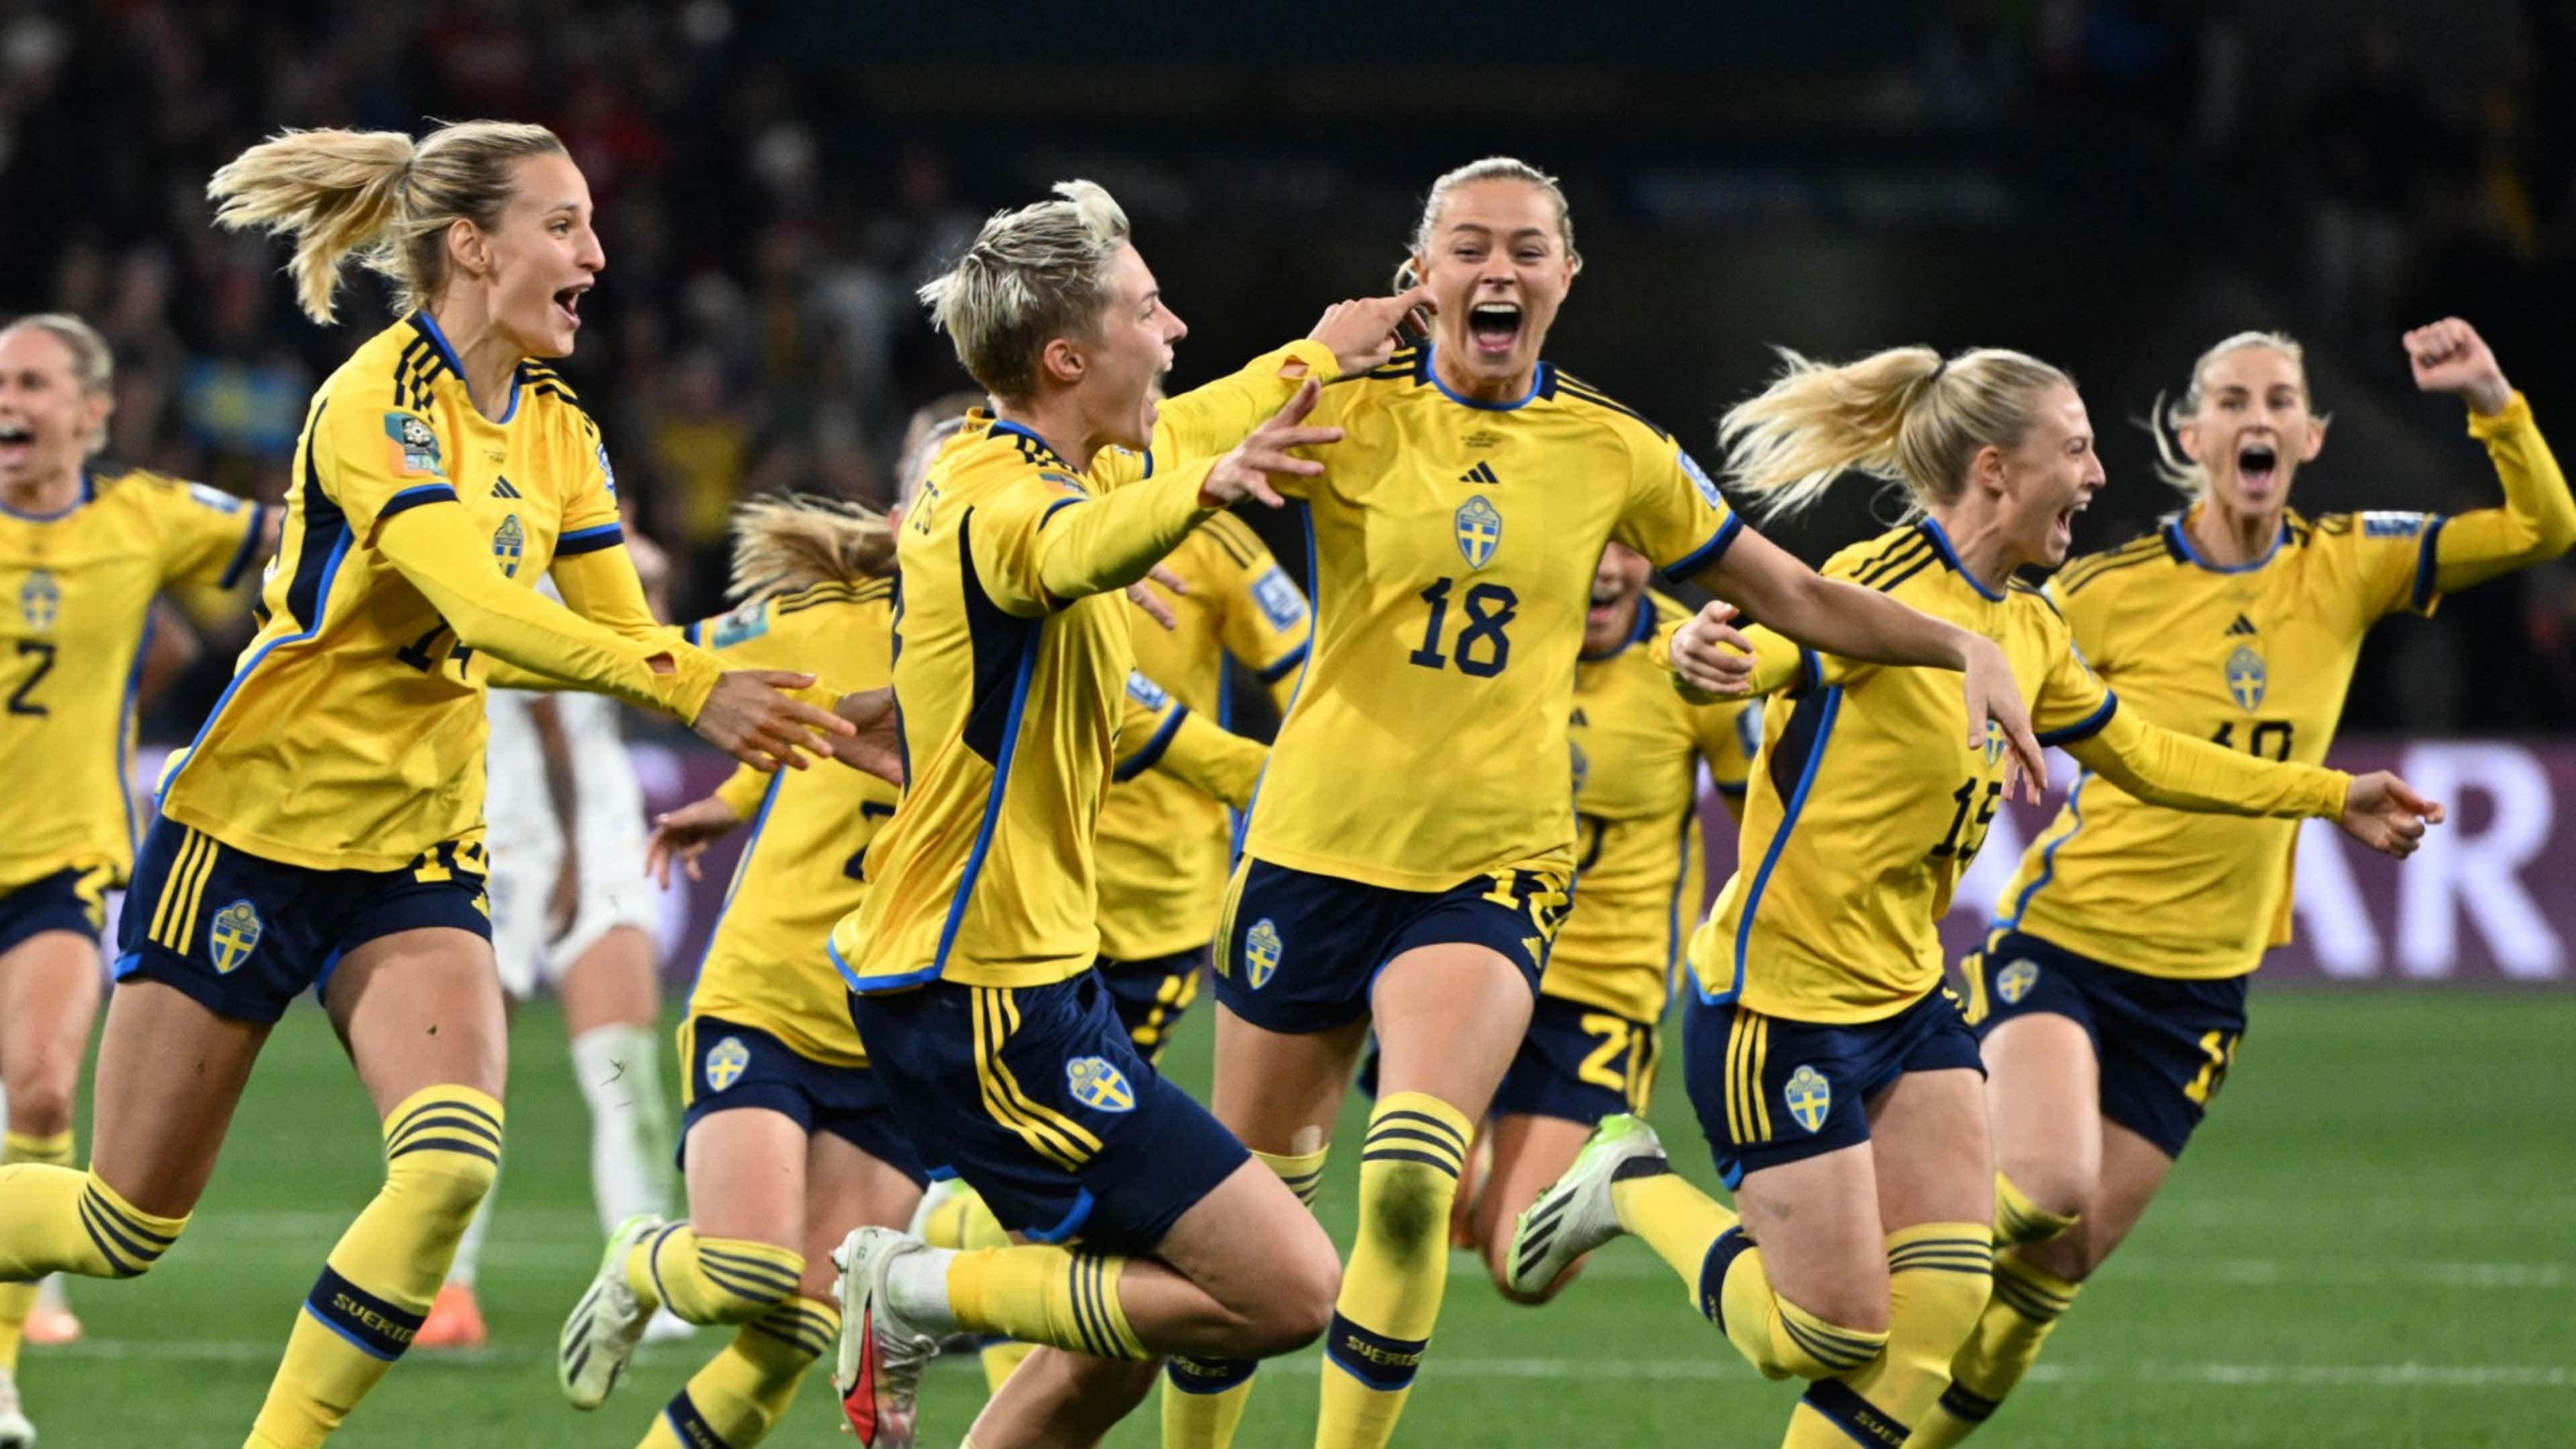 Swedish women's team replace shirt names with messages of